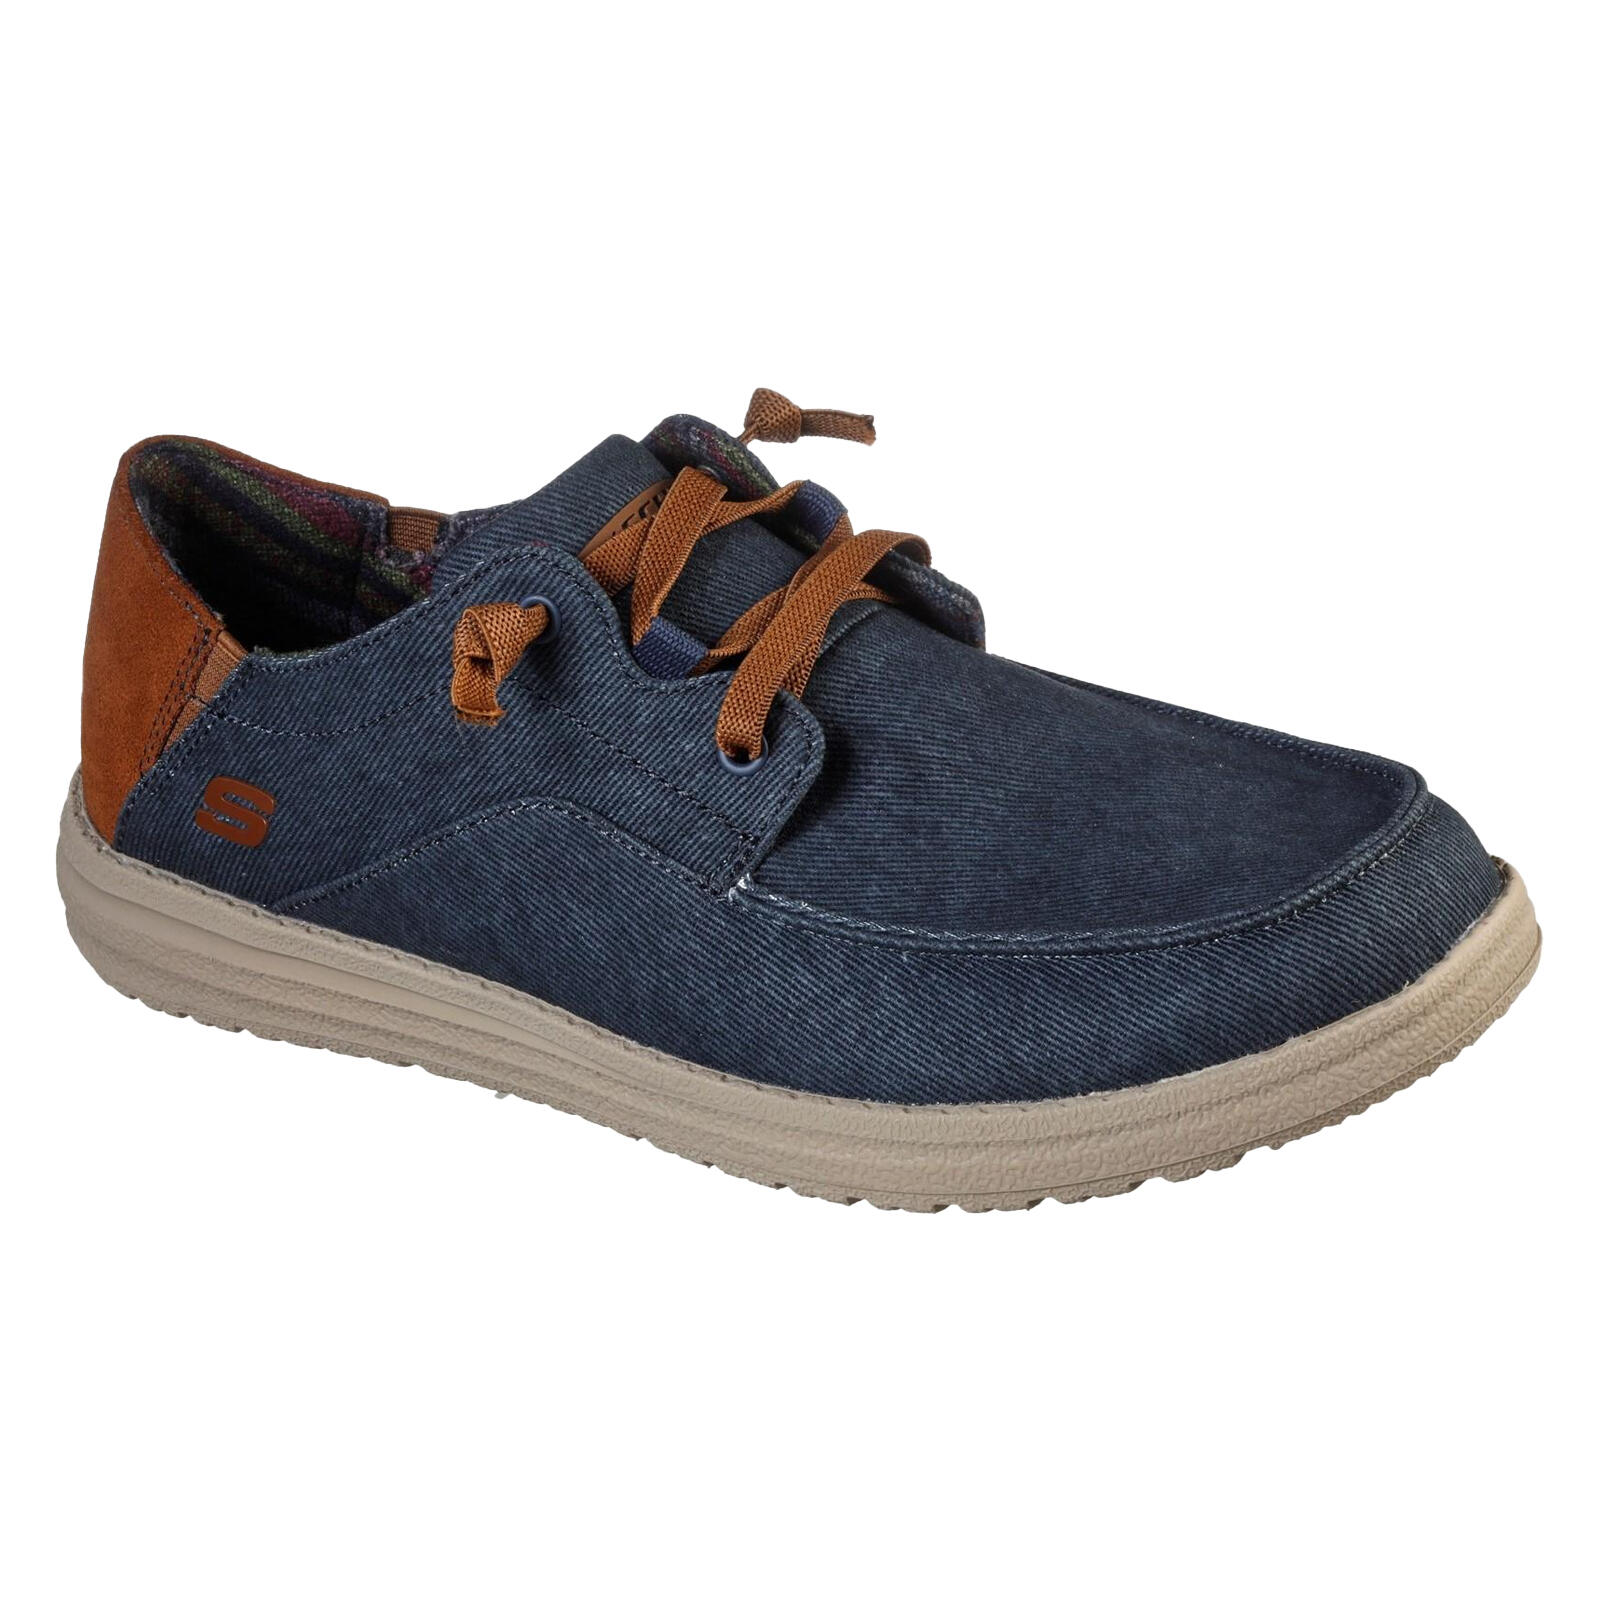 SKECHERS Mens Melson Planon Suede Casual Shoes (Navy)